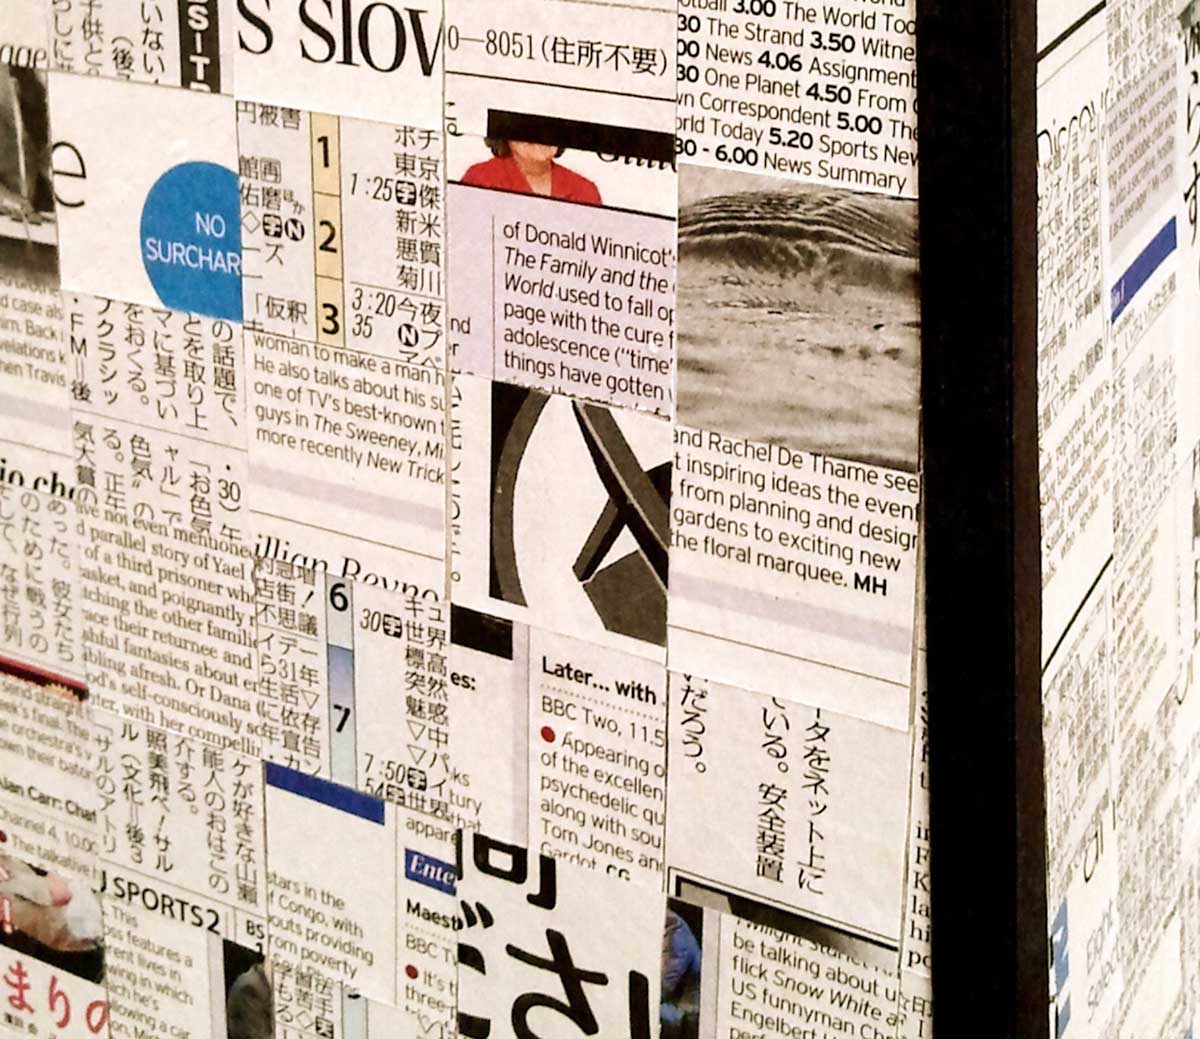 TOWERS OF BABEL (detail) | International newspapers. Tallest tower is 50cms x 28cms x 28cms